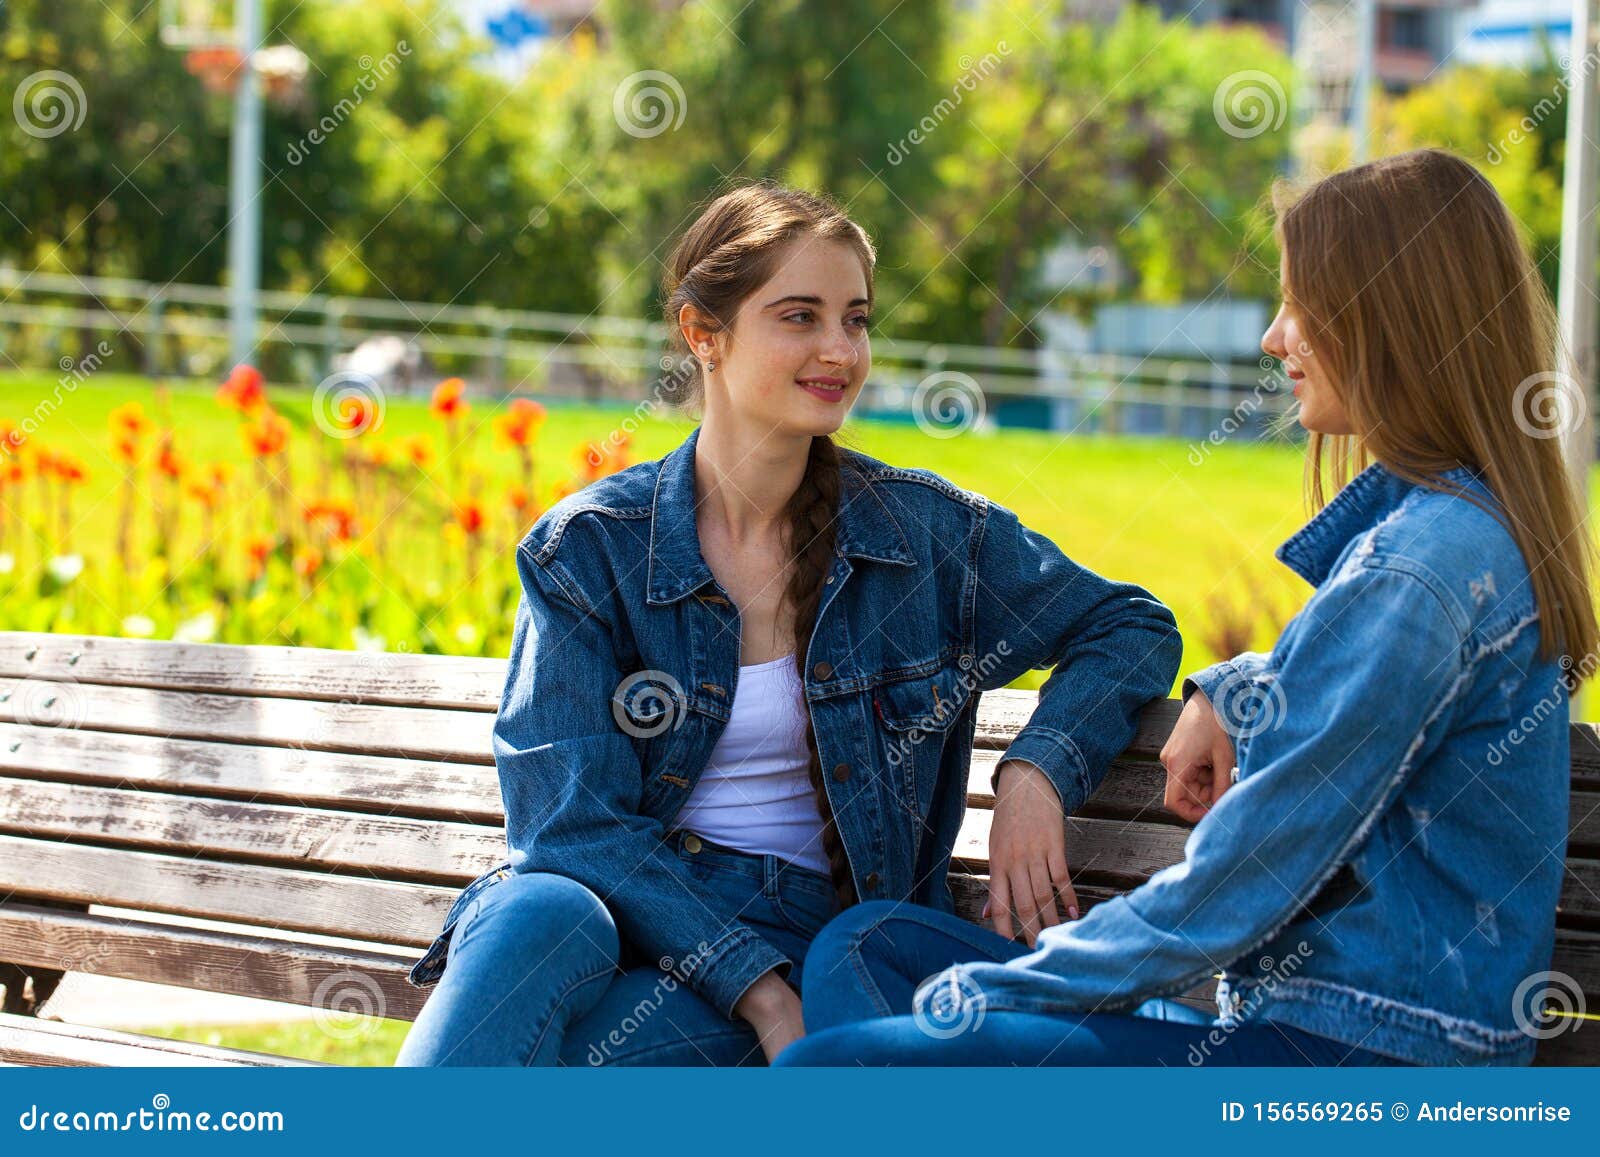 Two Beautiful Girlfriends Are Talking In A Park Sitting On A Bench Stock Image Image Of